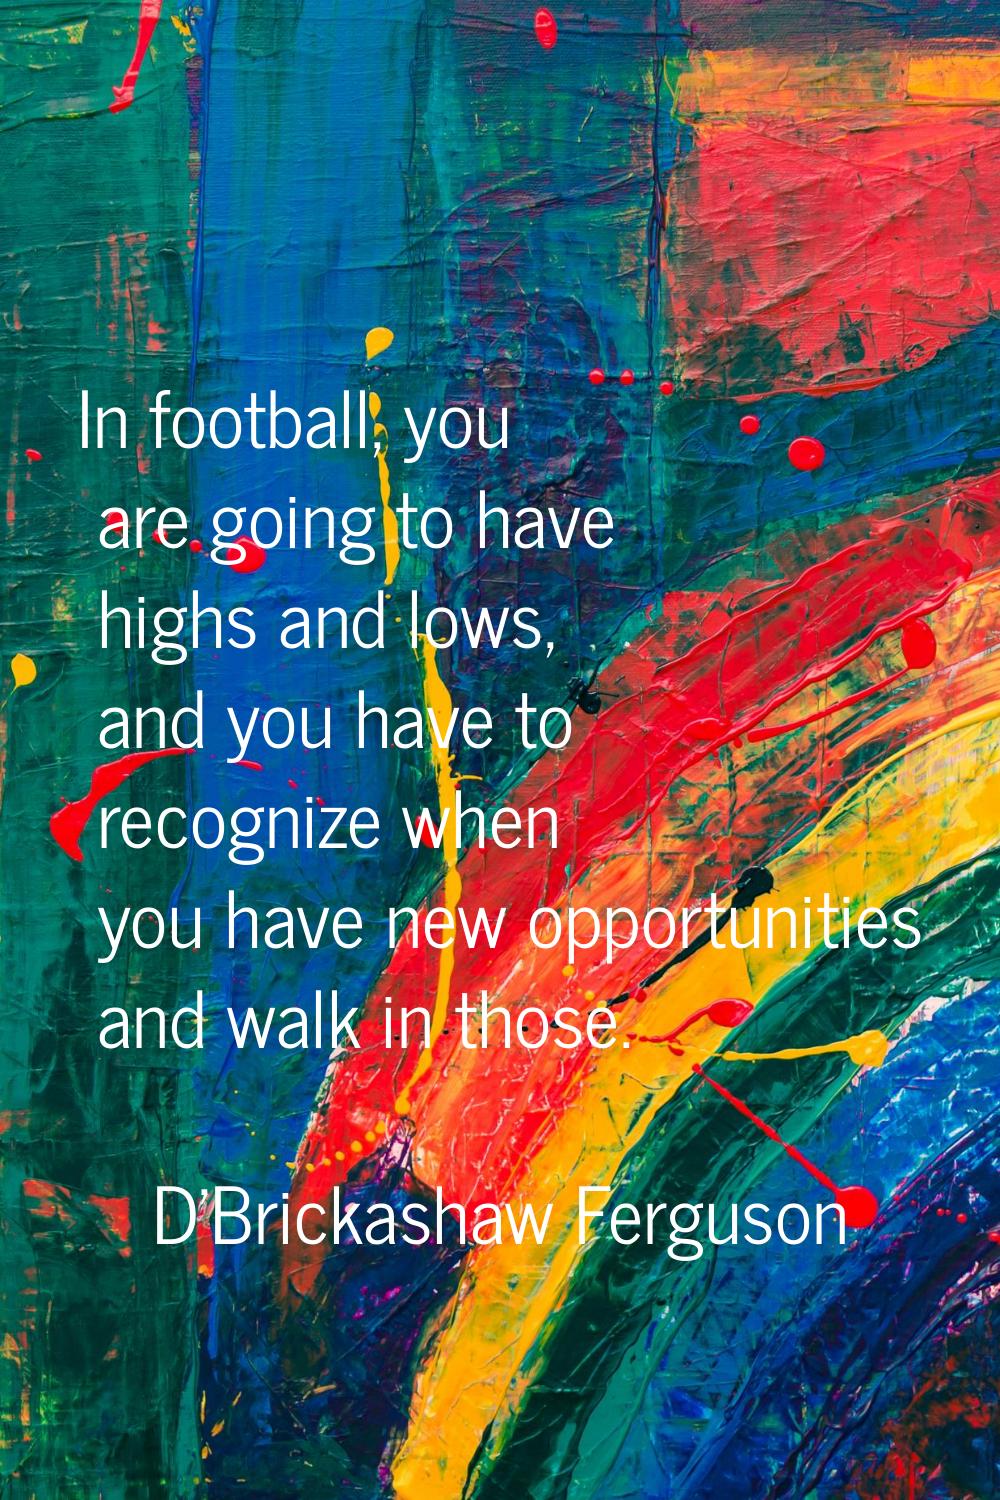 In football, you are going to have highs and lows, and you have to recognize when you have new oppo